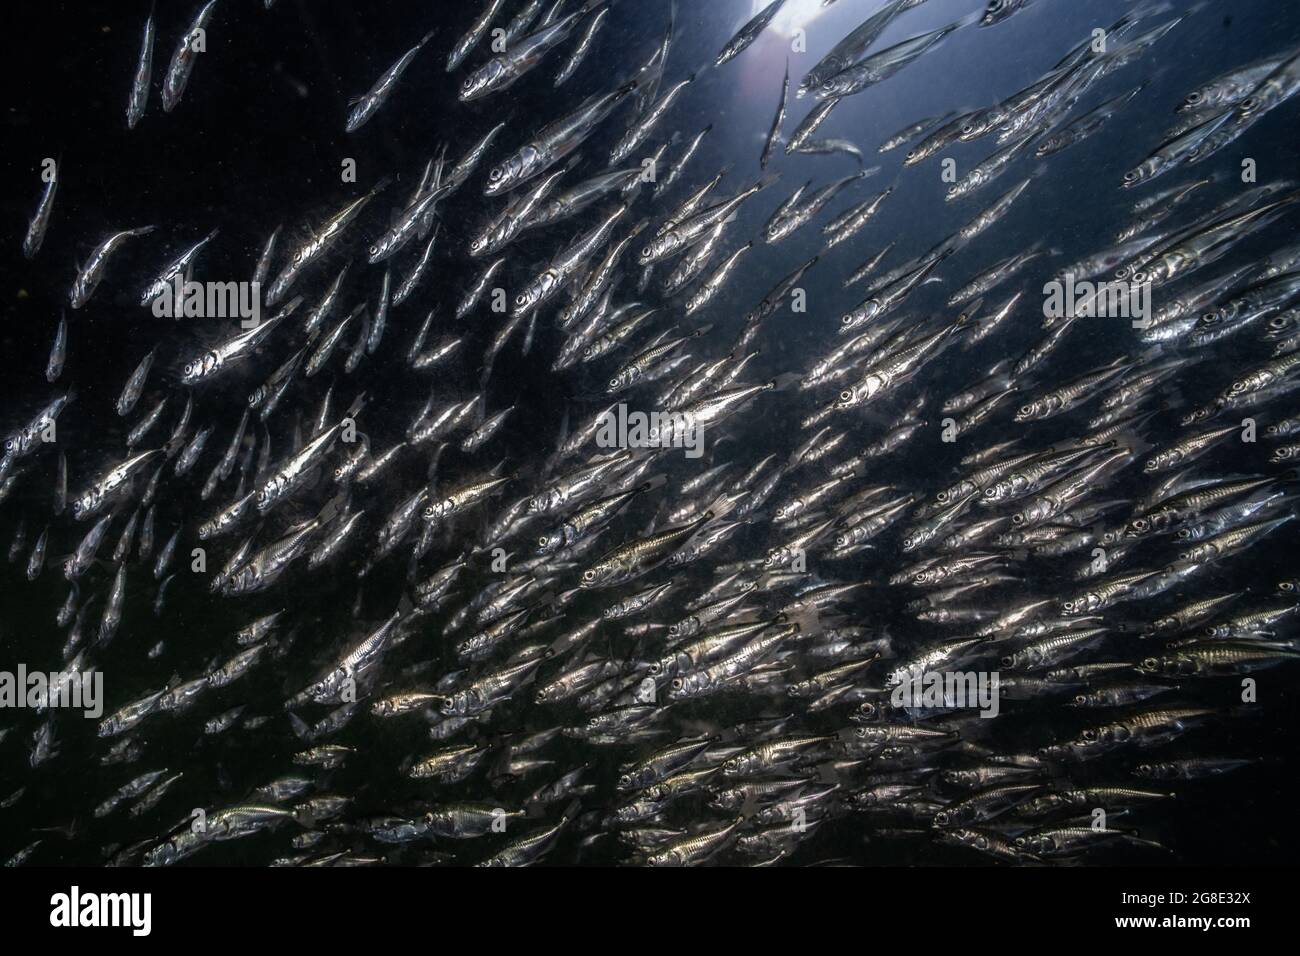 Underwater image of a school of small silver fish in the ocean in the Vancouver harbor in British Columbia. Stock Photo